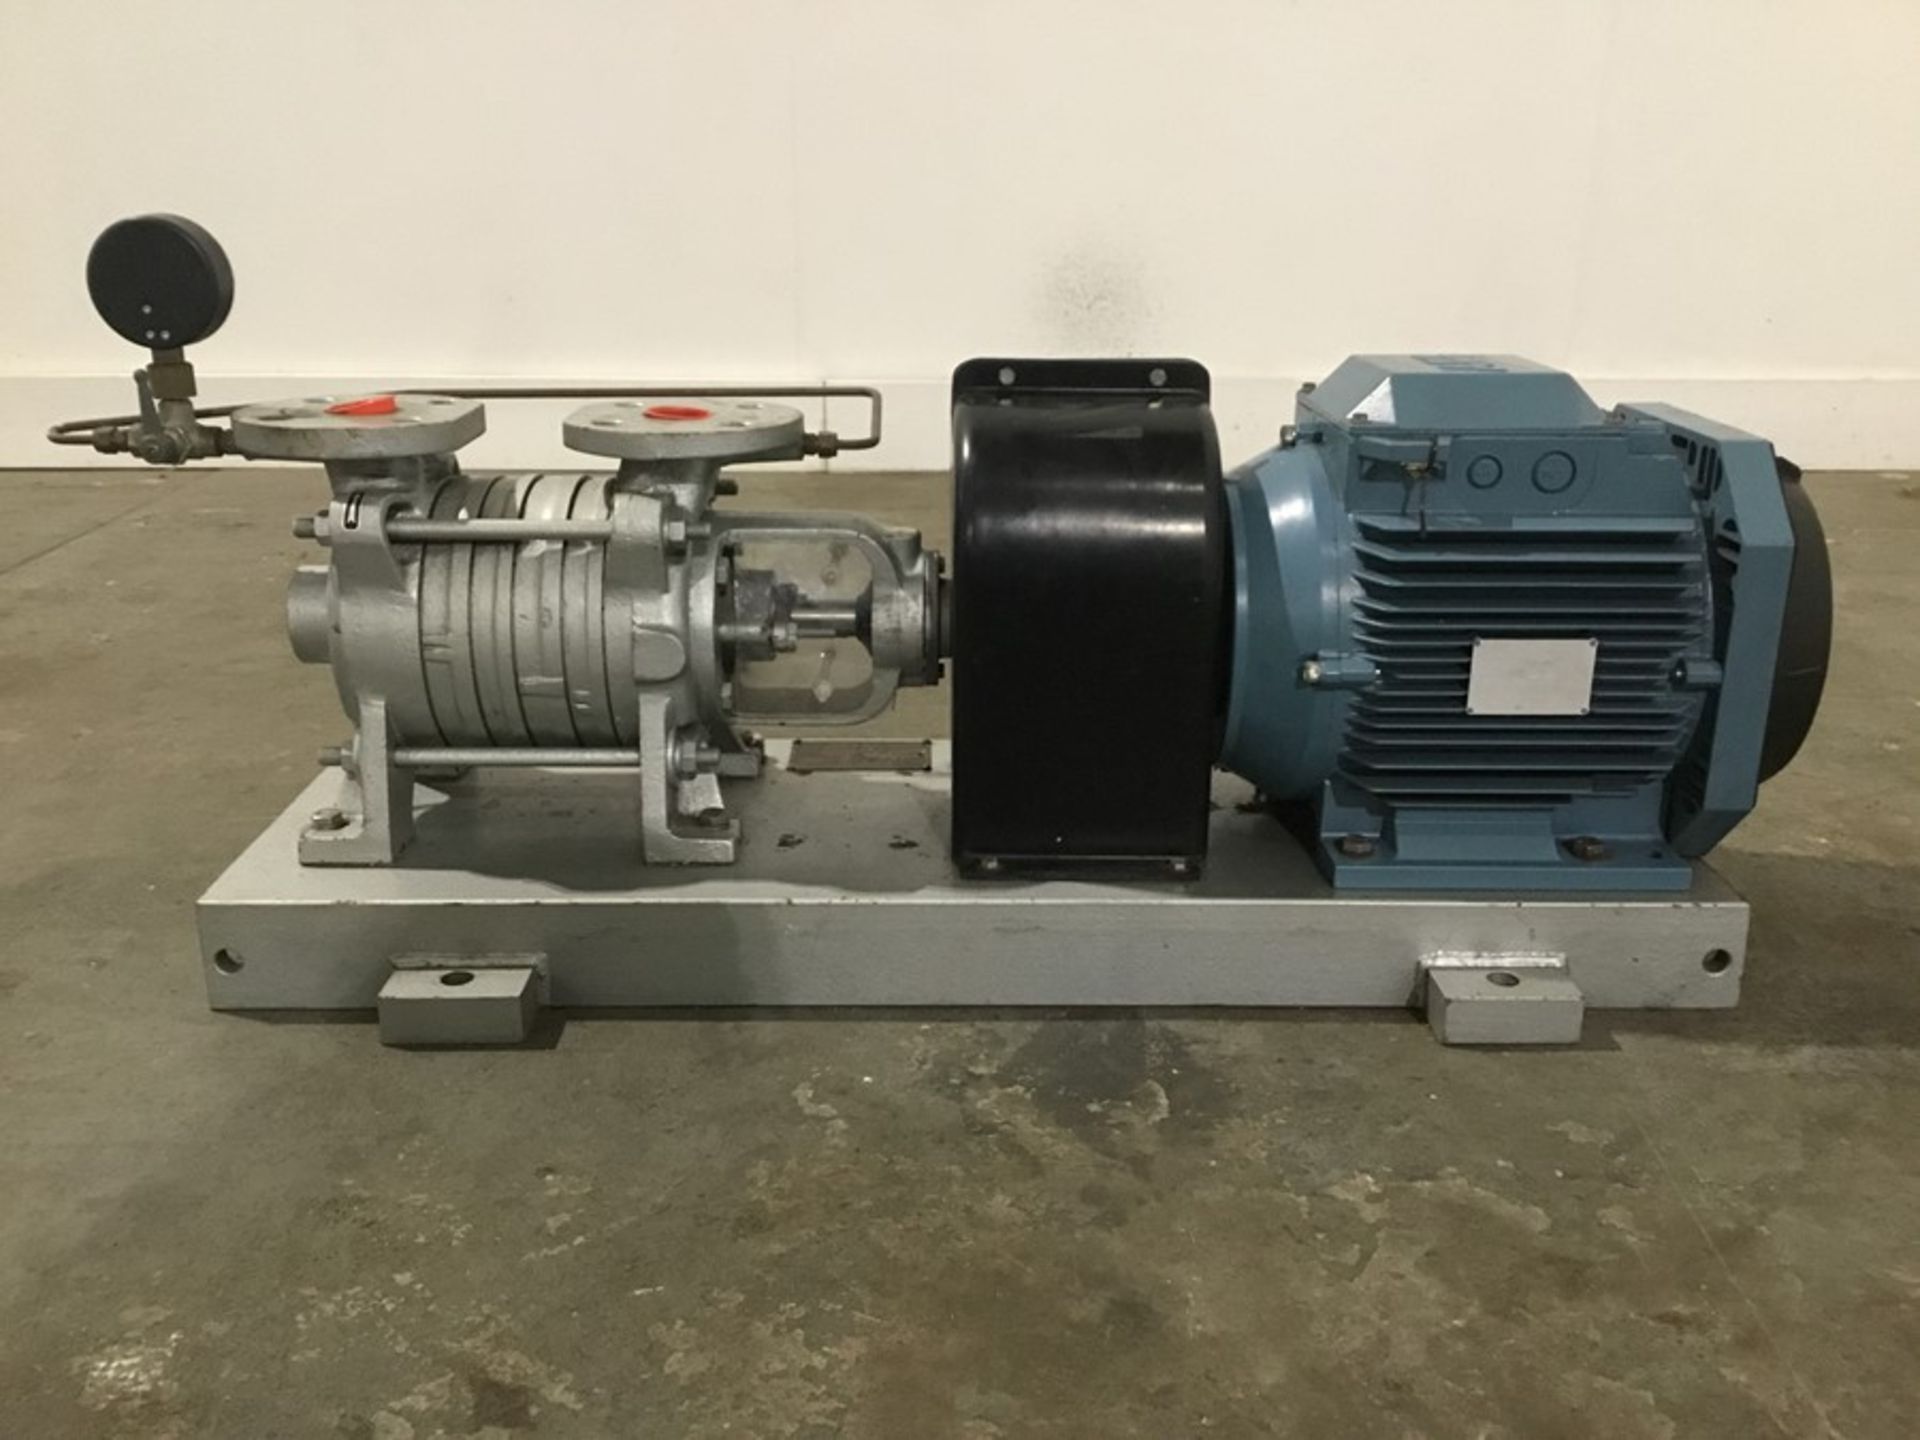 Pair of Hamworthy Model BP412 Twin stage Turbine Pump, Flow 12m3/hour - 50.0M 1750Rpm powered by ABB - Image 16 of 39